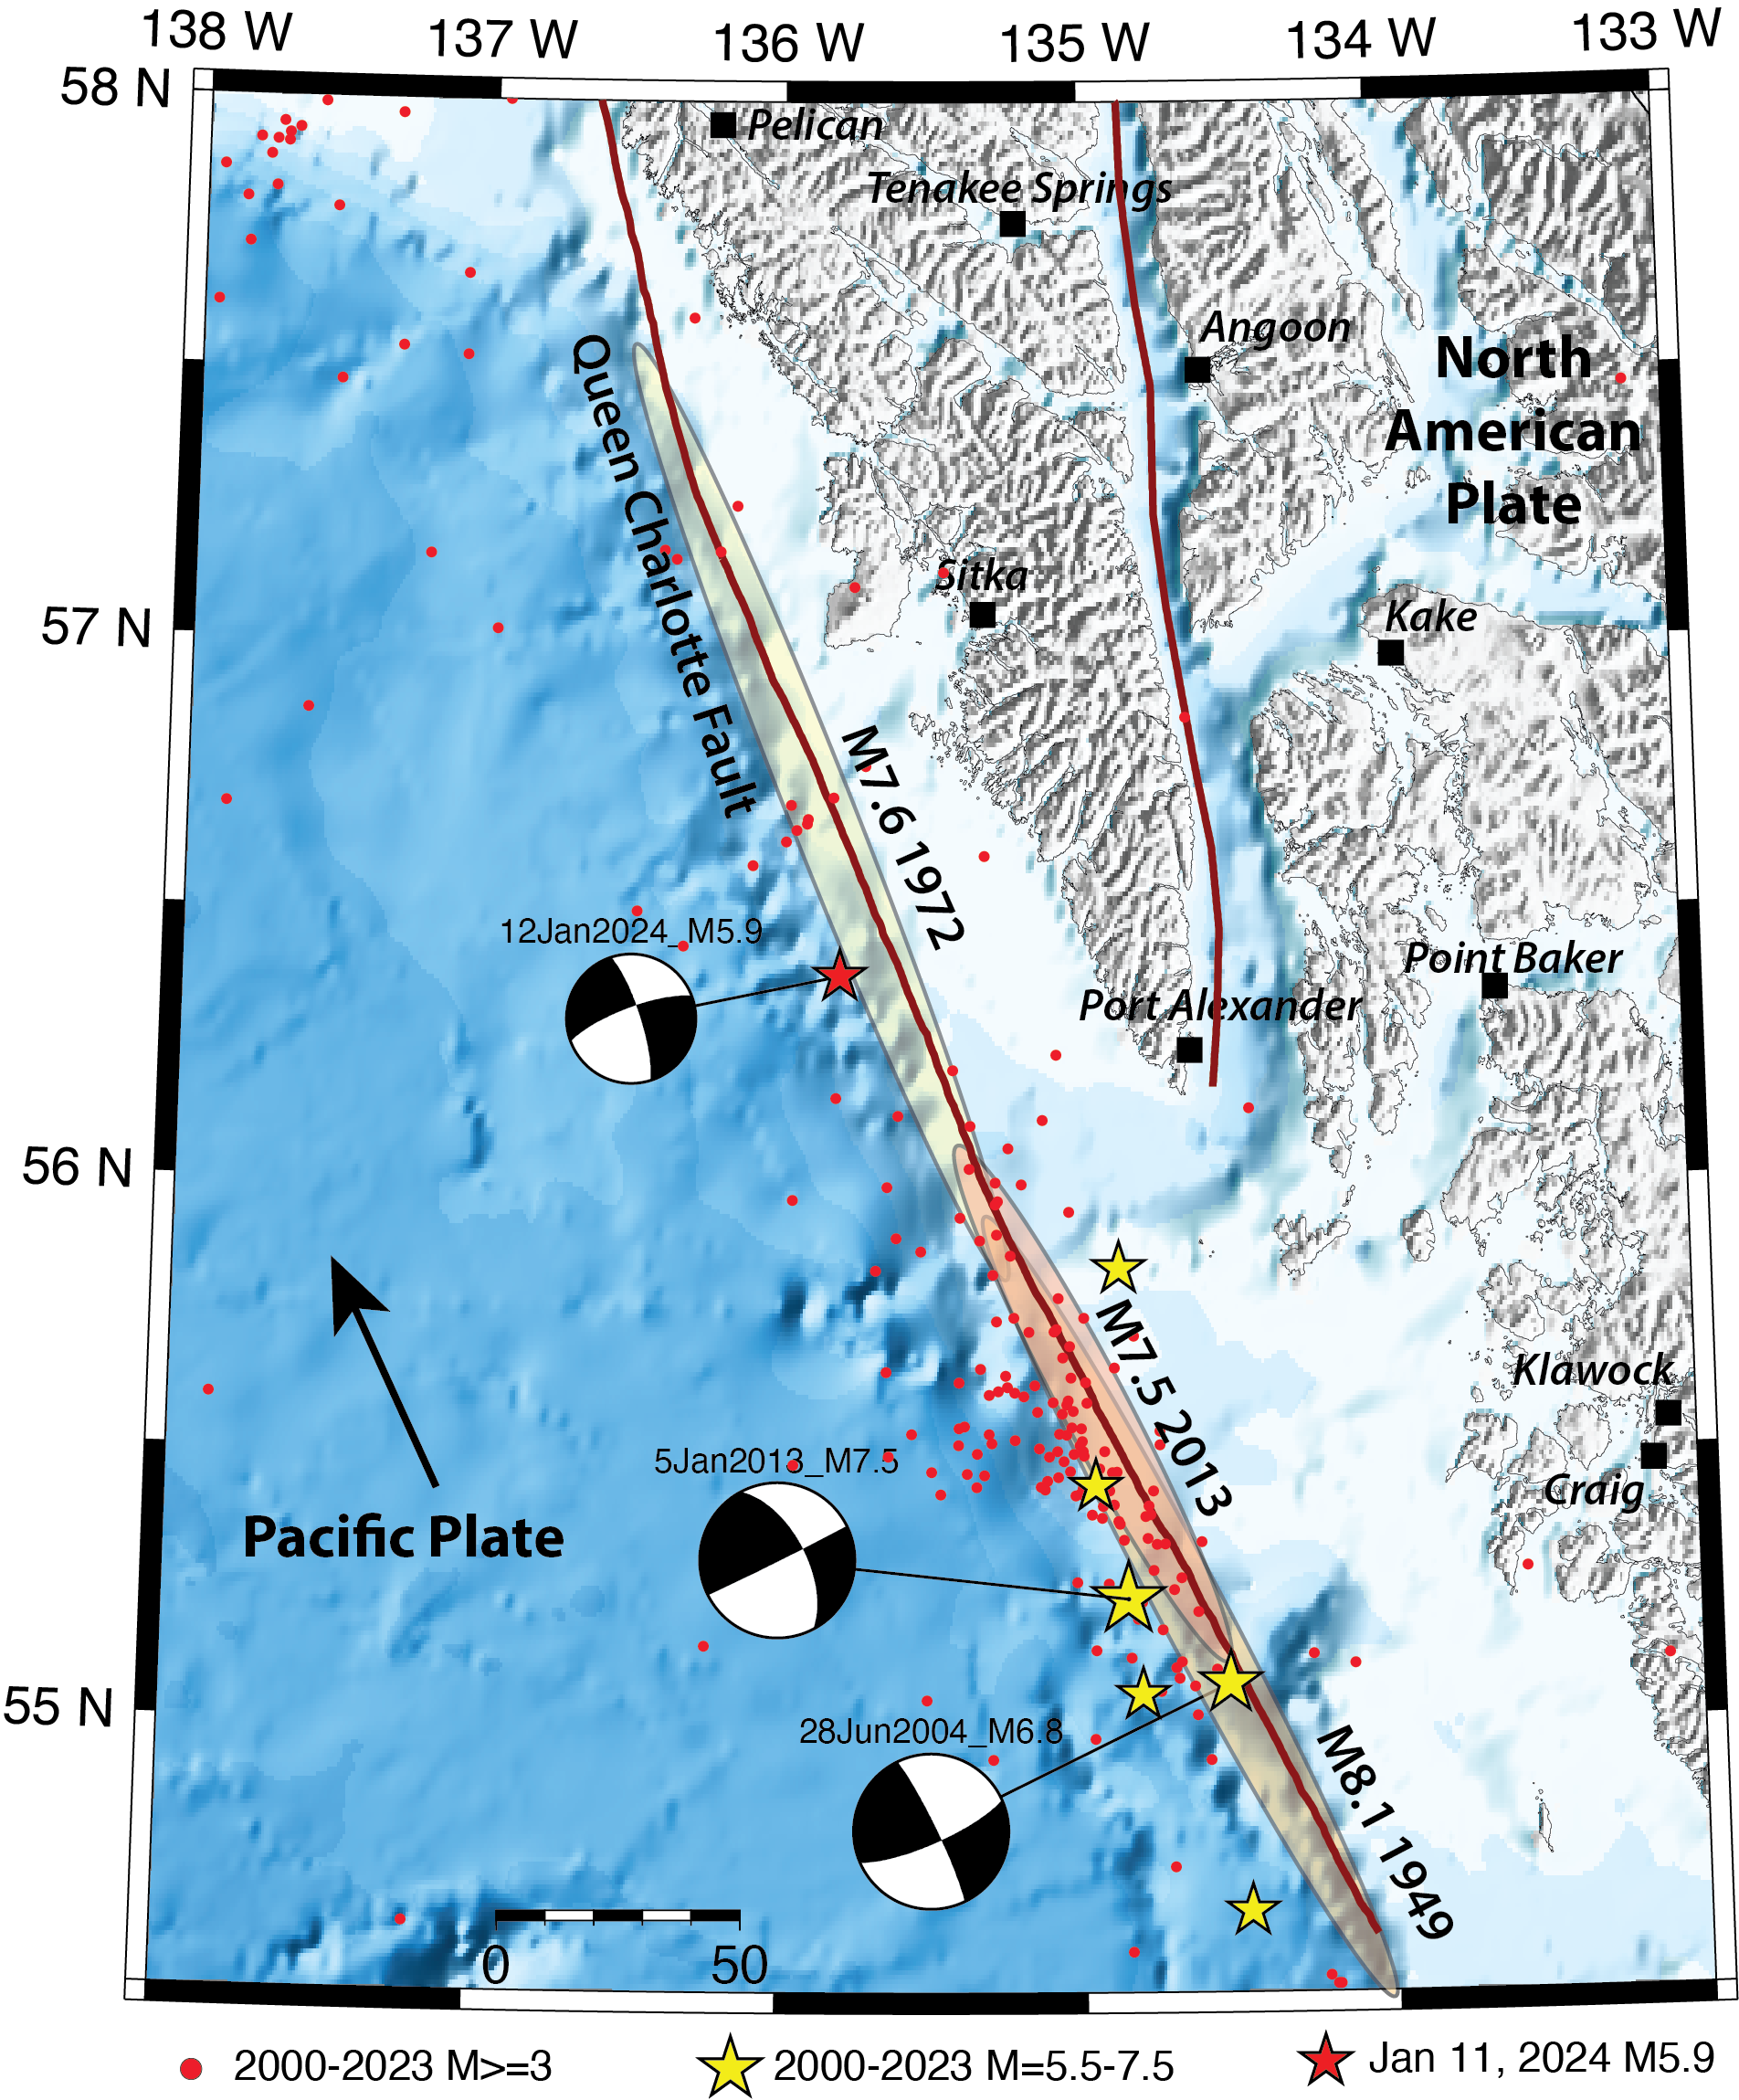 Map showing the M5.9 event with 2 major historical earthquakes along the Queen Charlotte–Fairweather fault system.